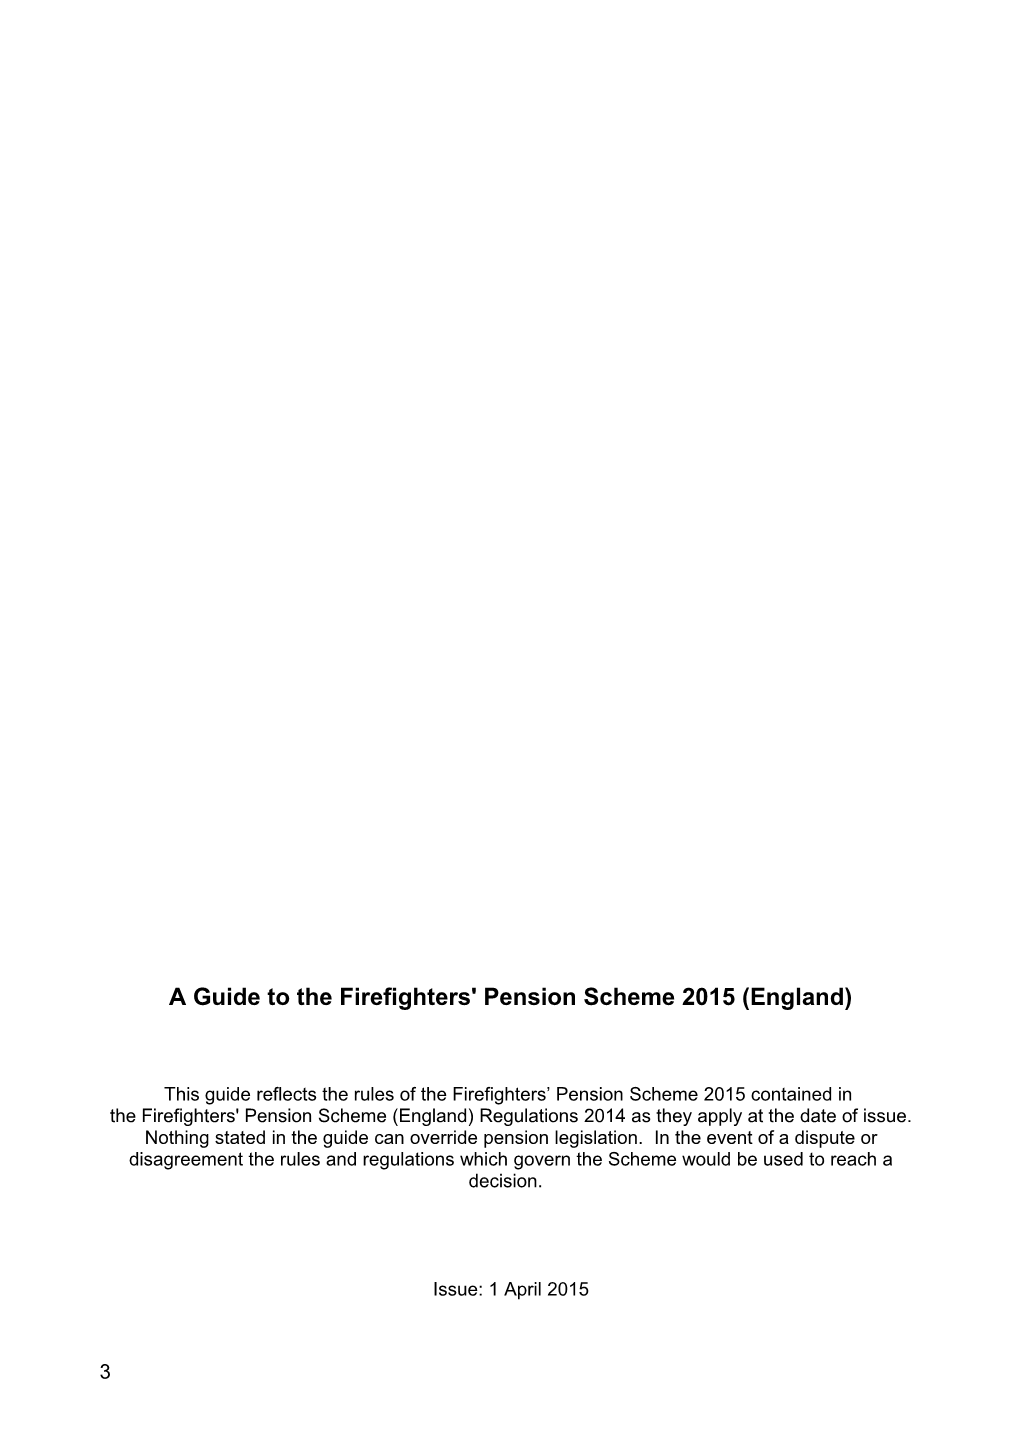 The Firefighters' Pension Scheme 2006